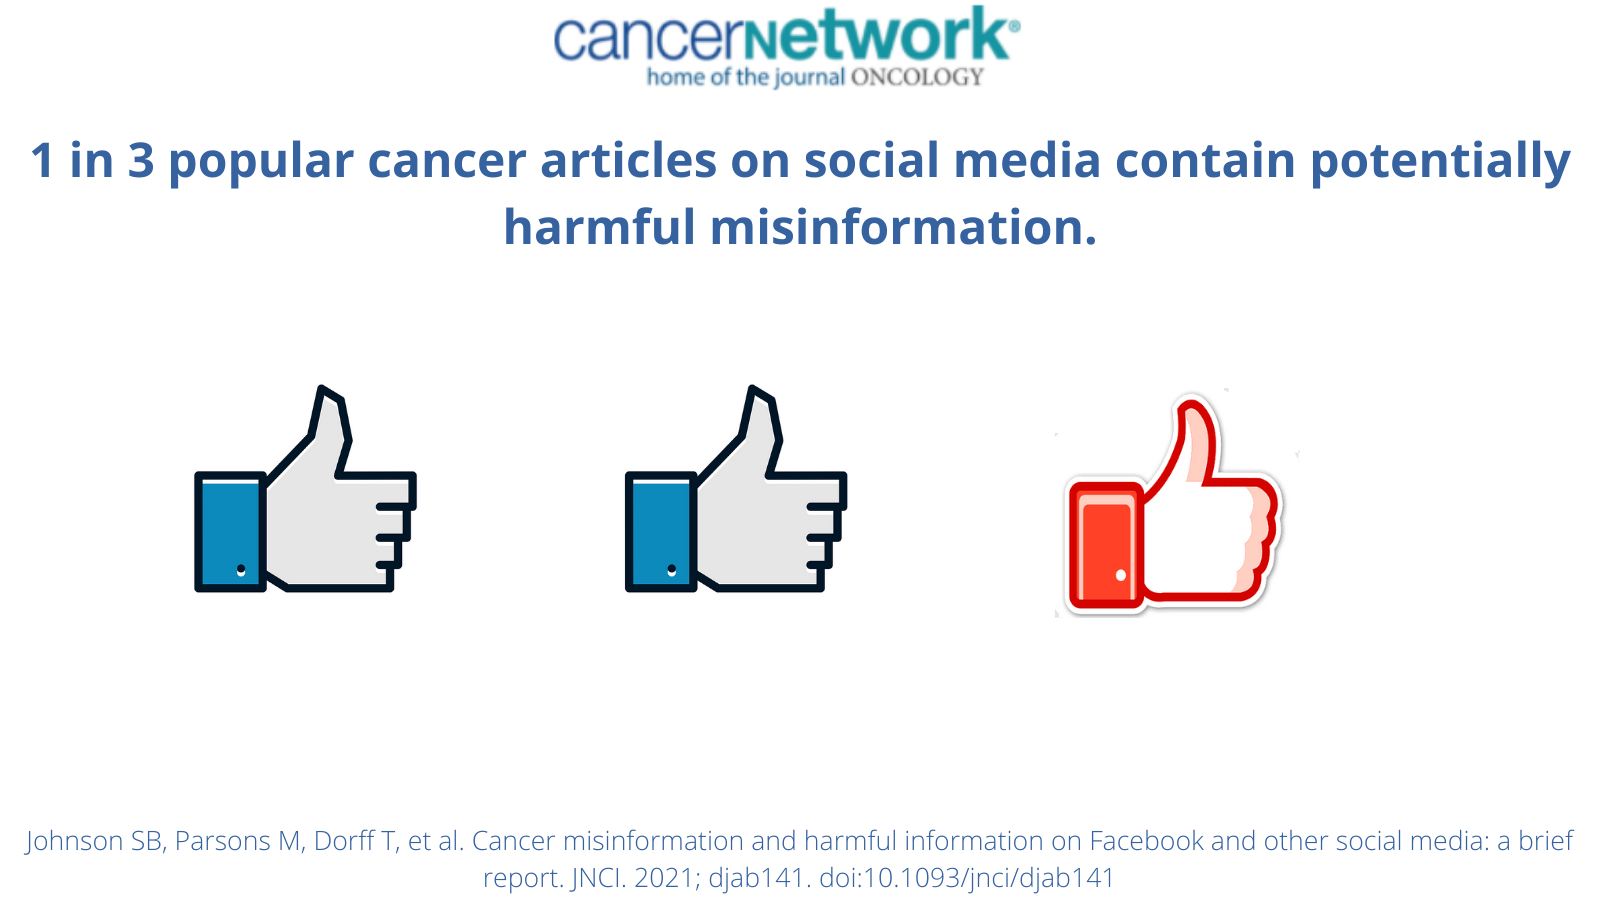 One in 3 popular cancer articles on social media contain potentially harmful misinformation, according to a report published in the Journal of the National Cancer Institute.